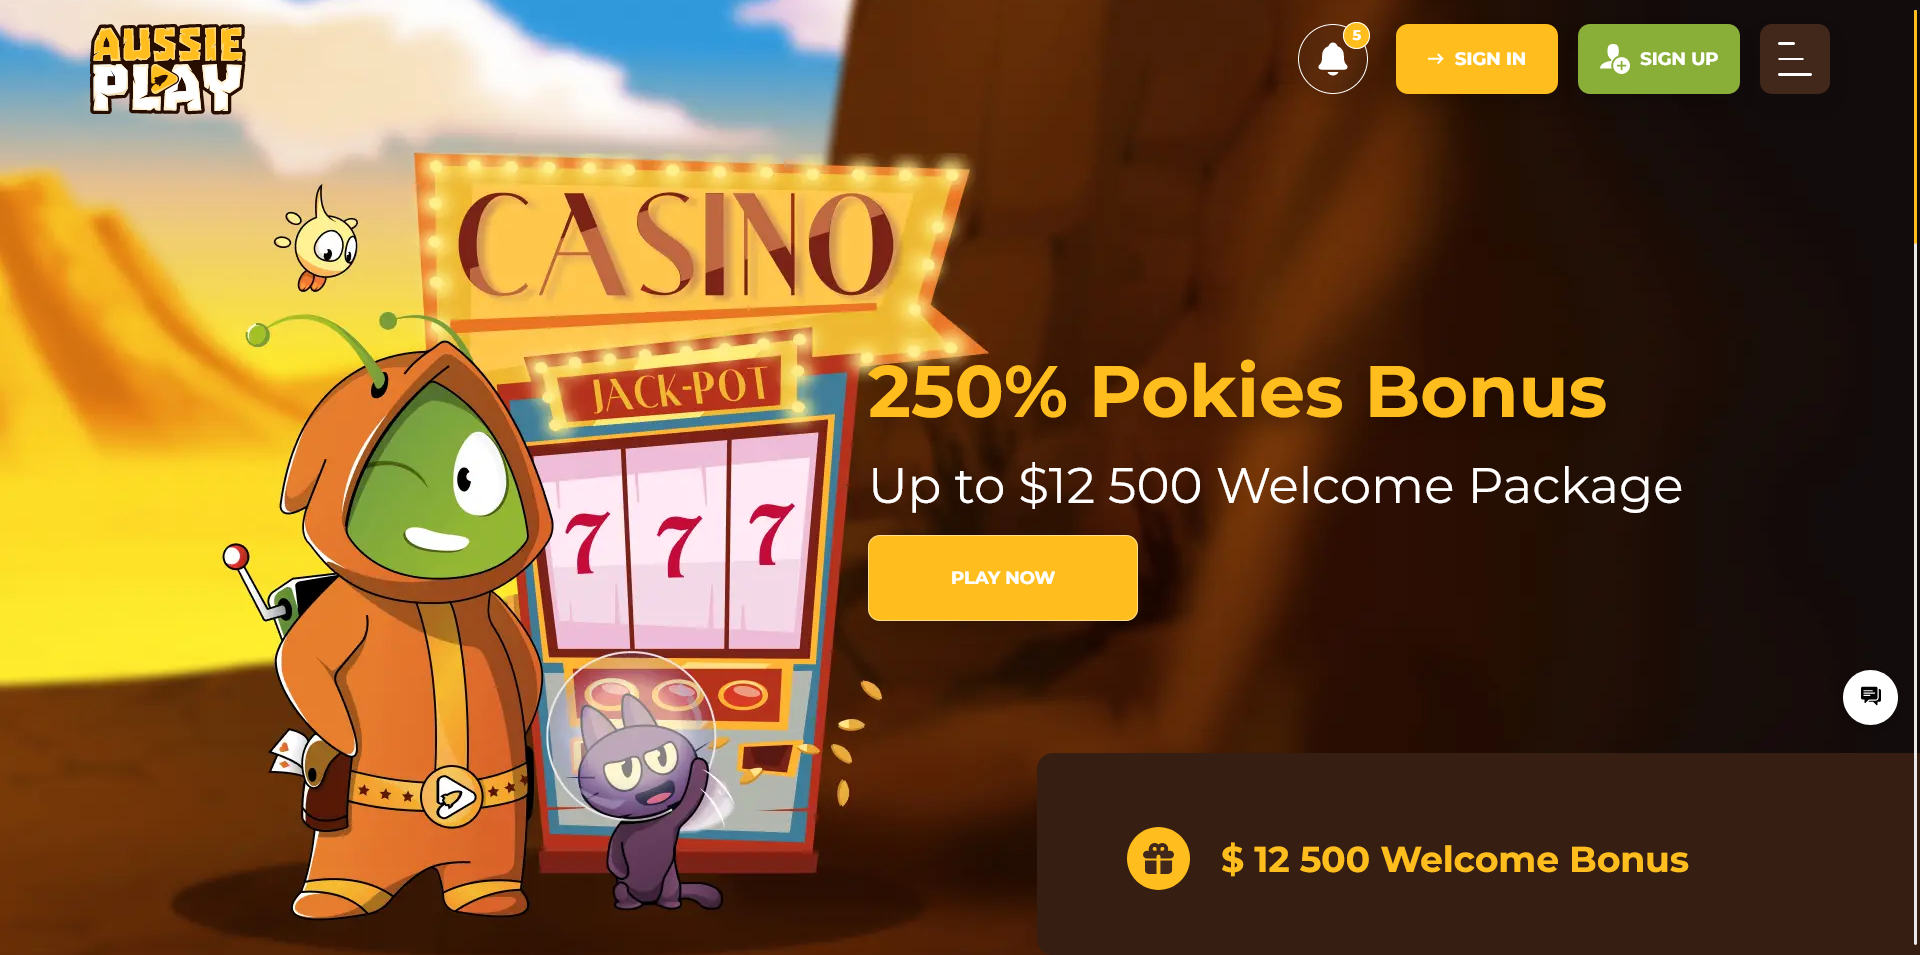 Screenshot of the Aussie Play Casino home page